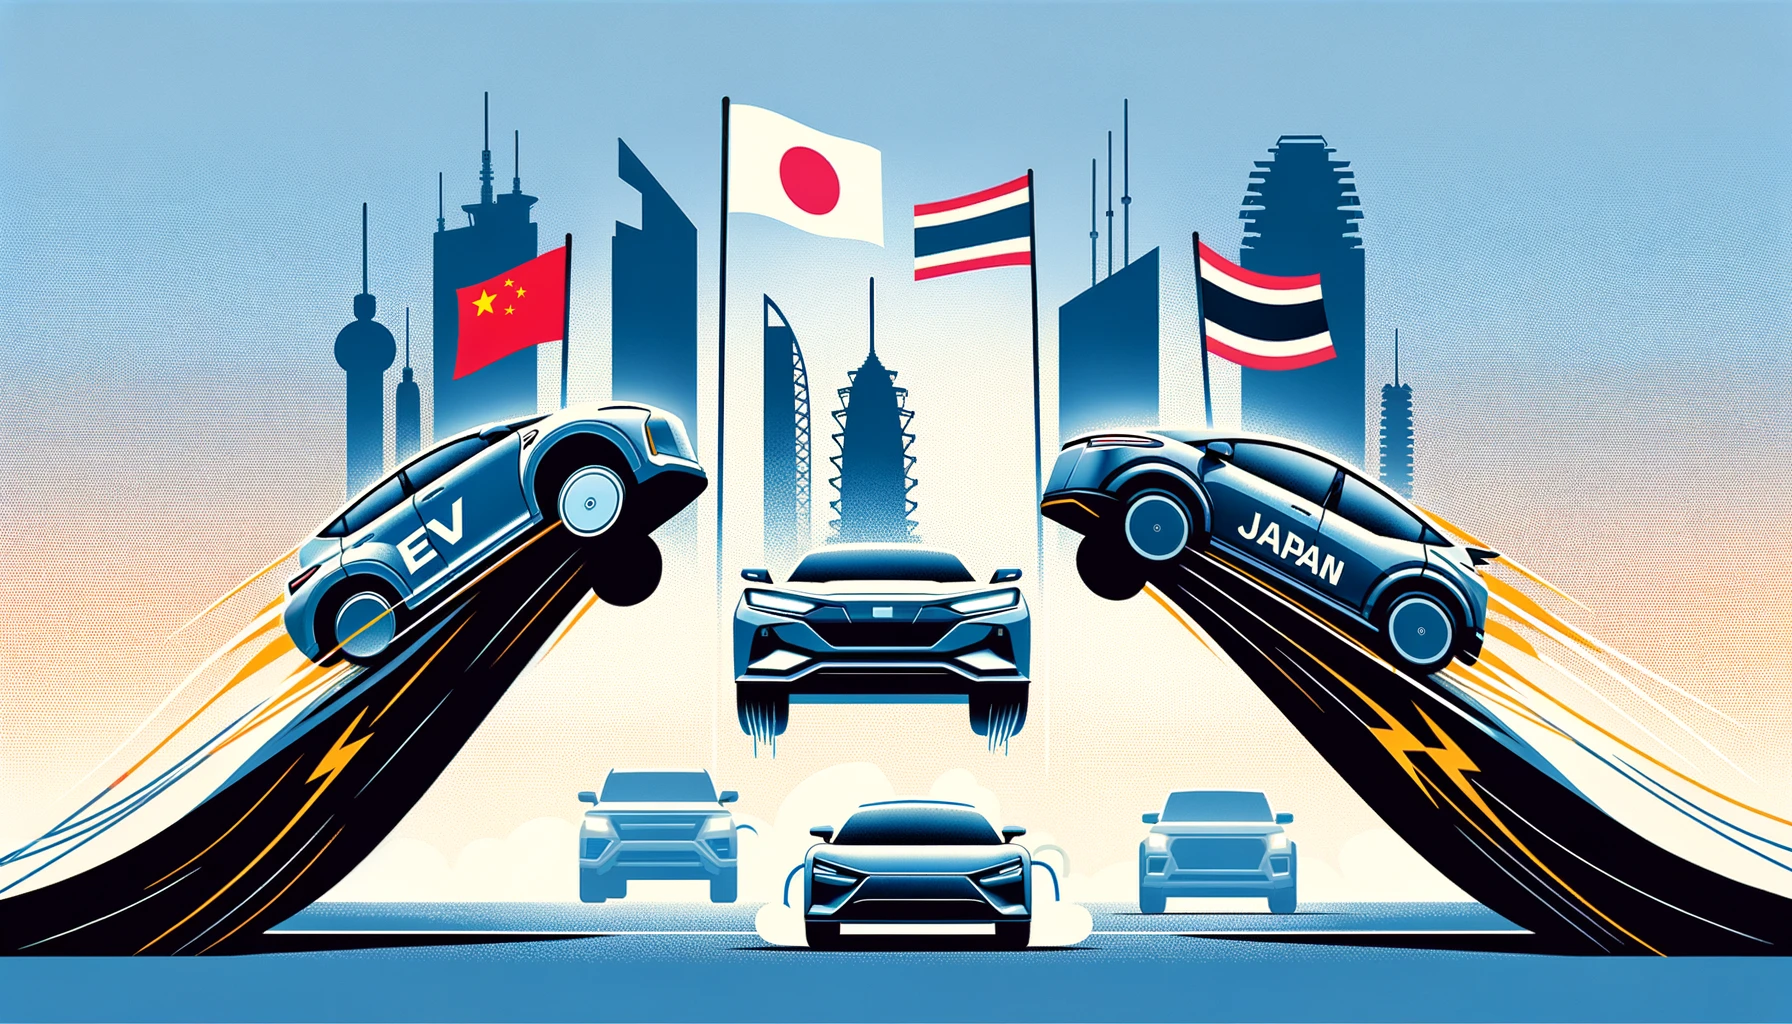 Chinese EV manufacturers are wagering on their ability to surpass Japanese brands in Thailand's market.